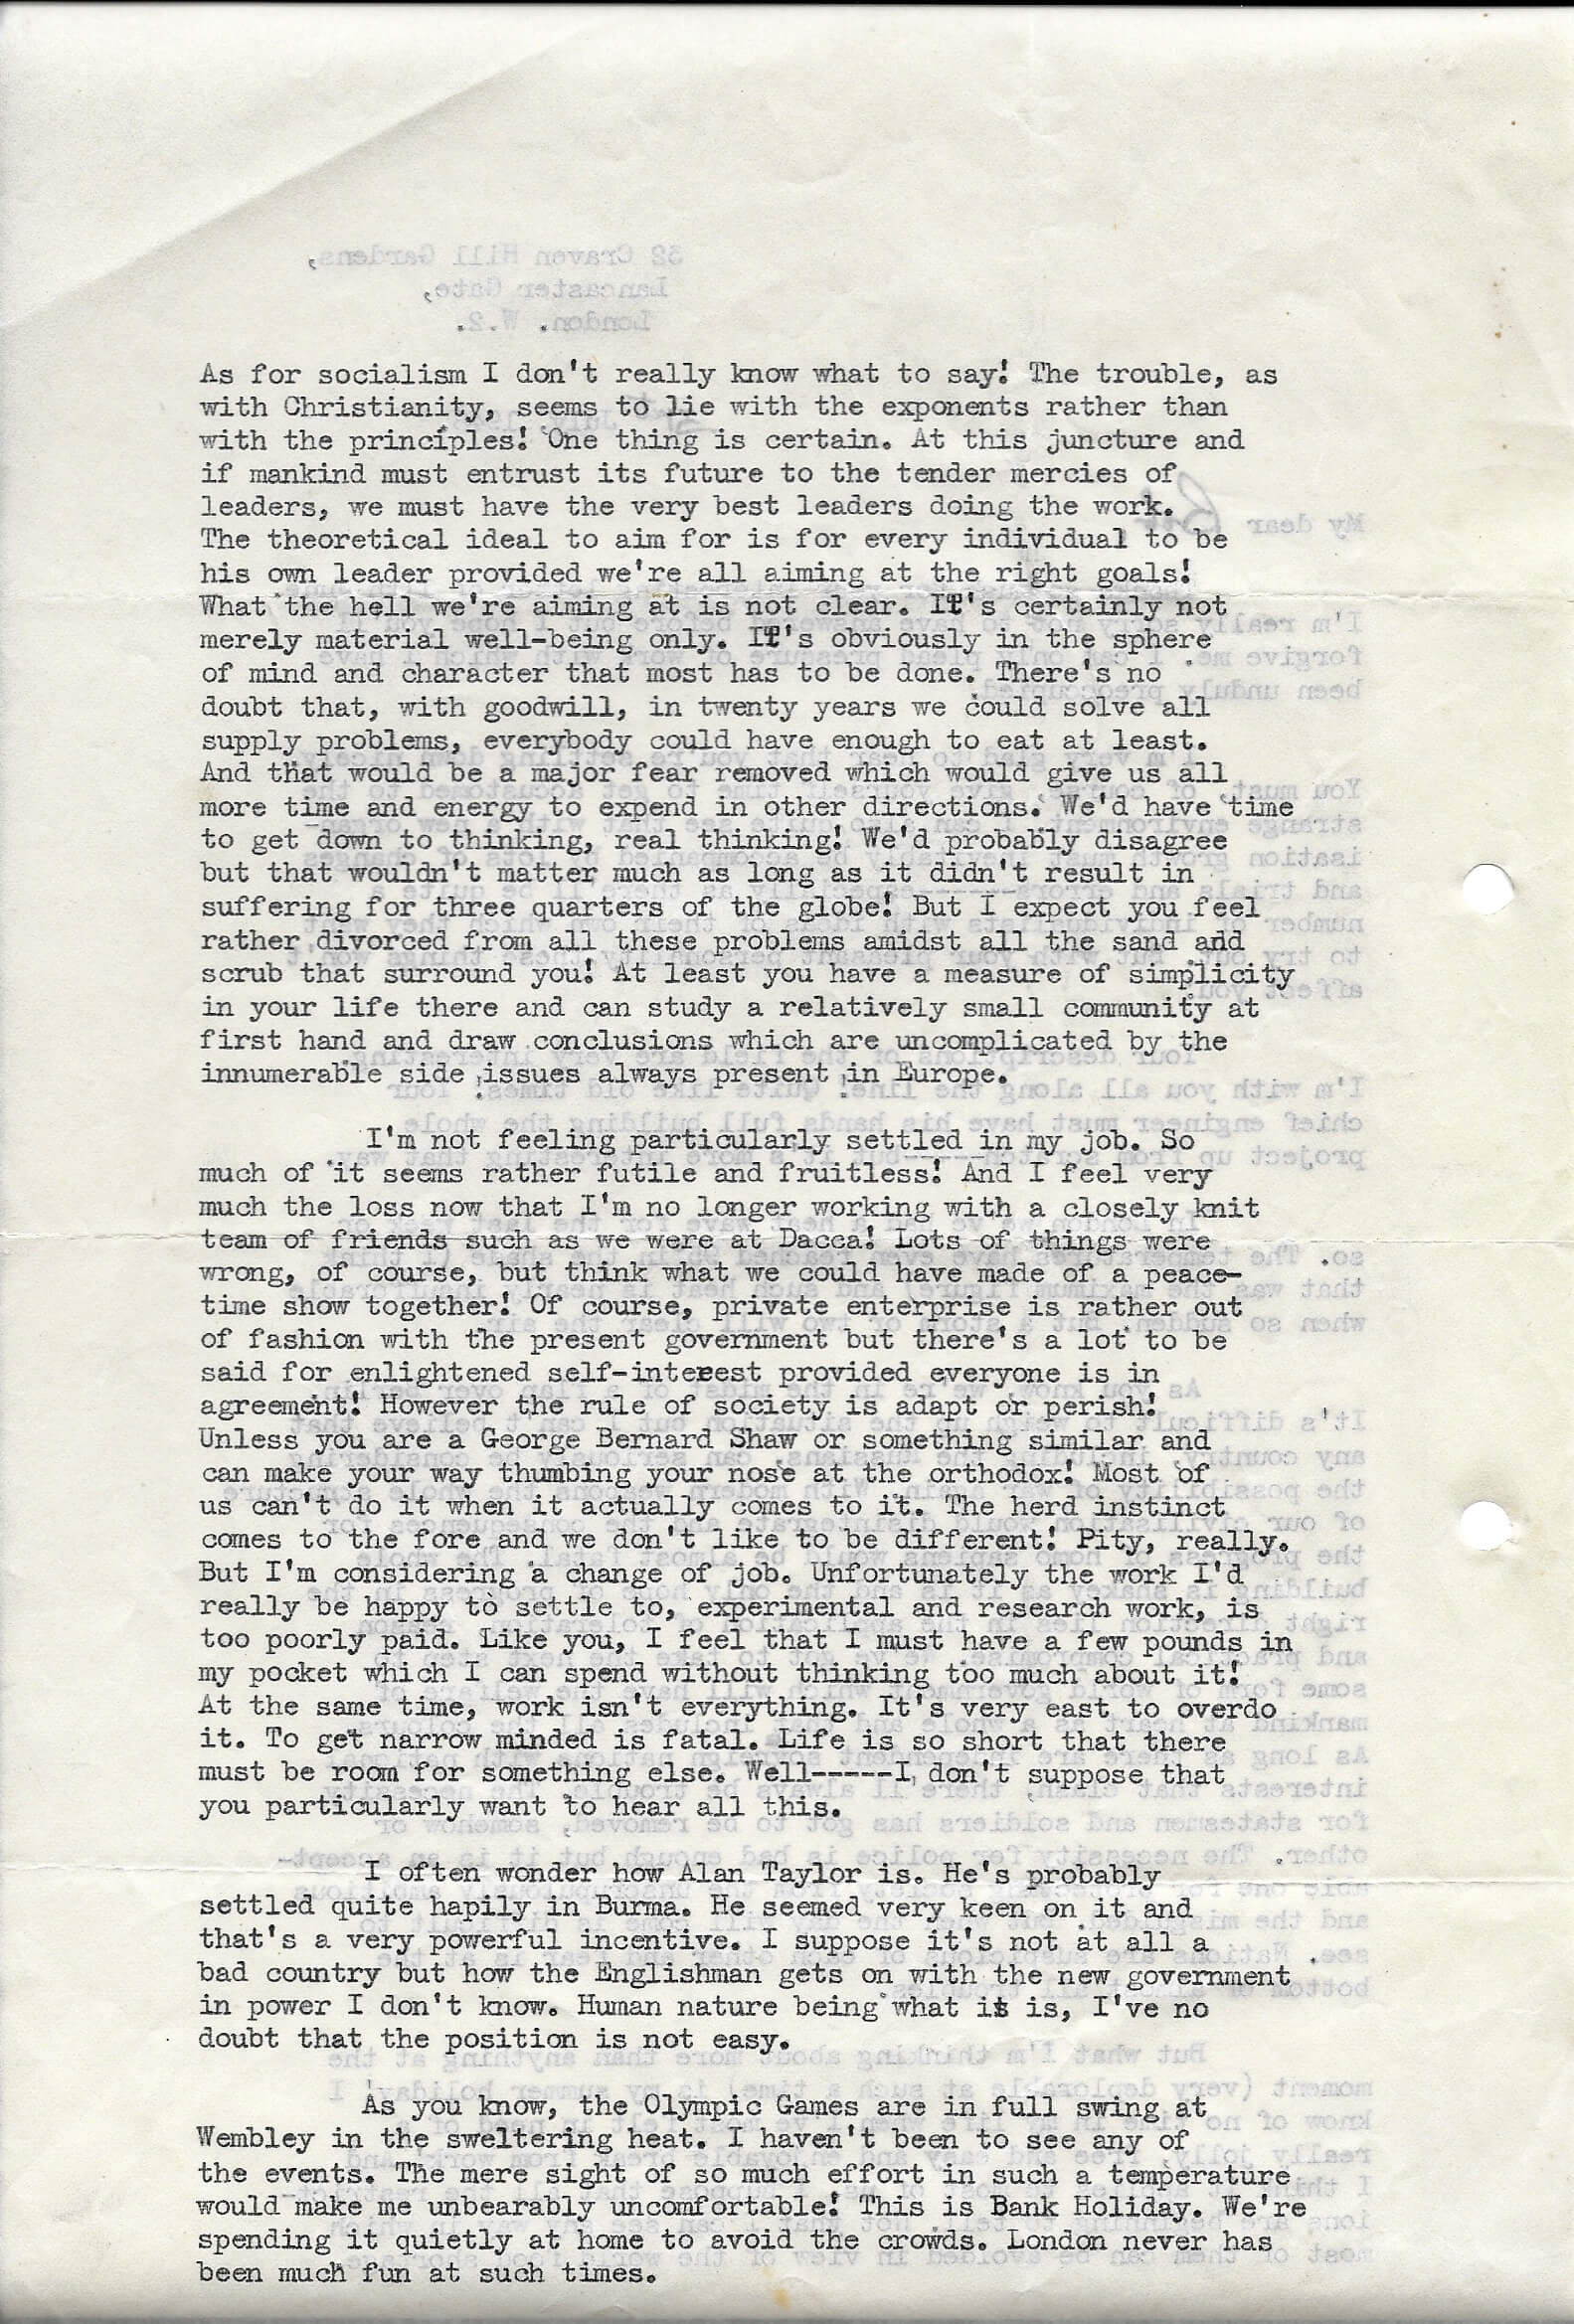 31 Jul 1948 - E D Kassell letter 2nd page